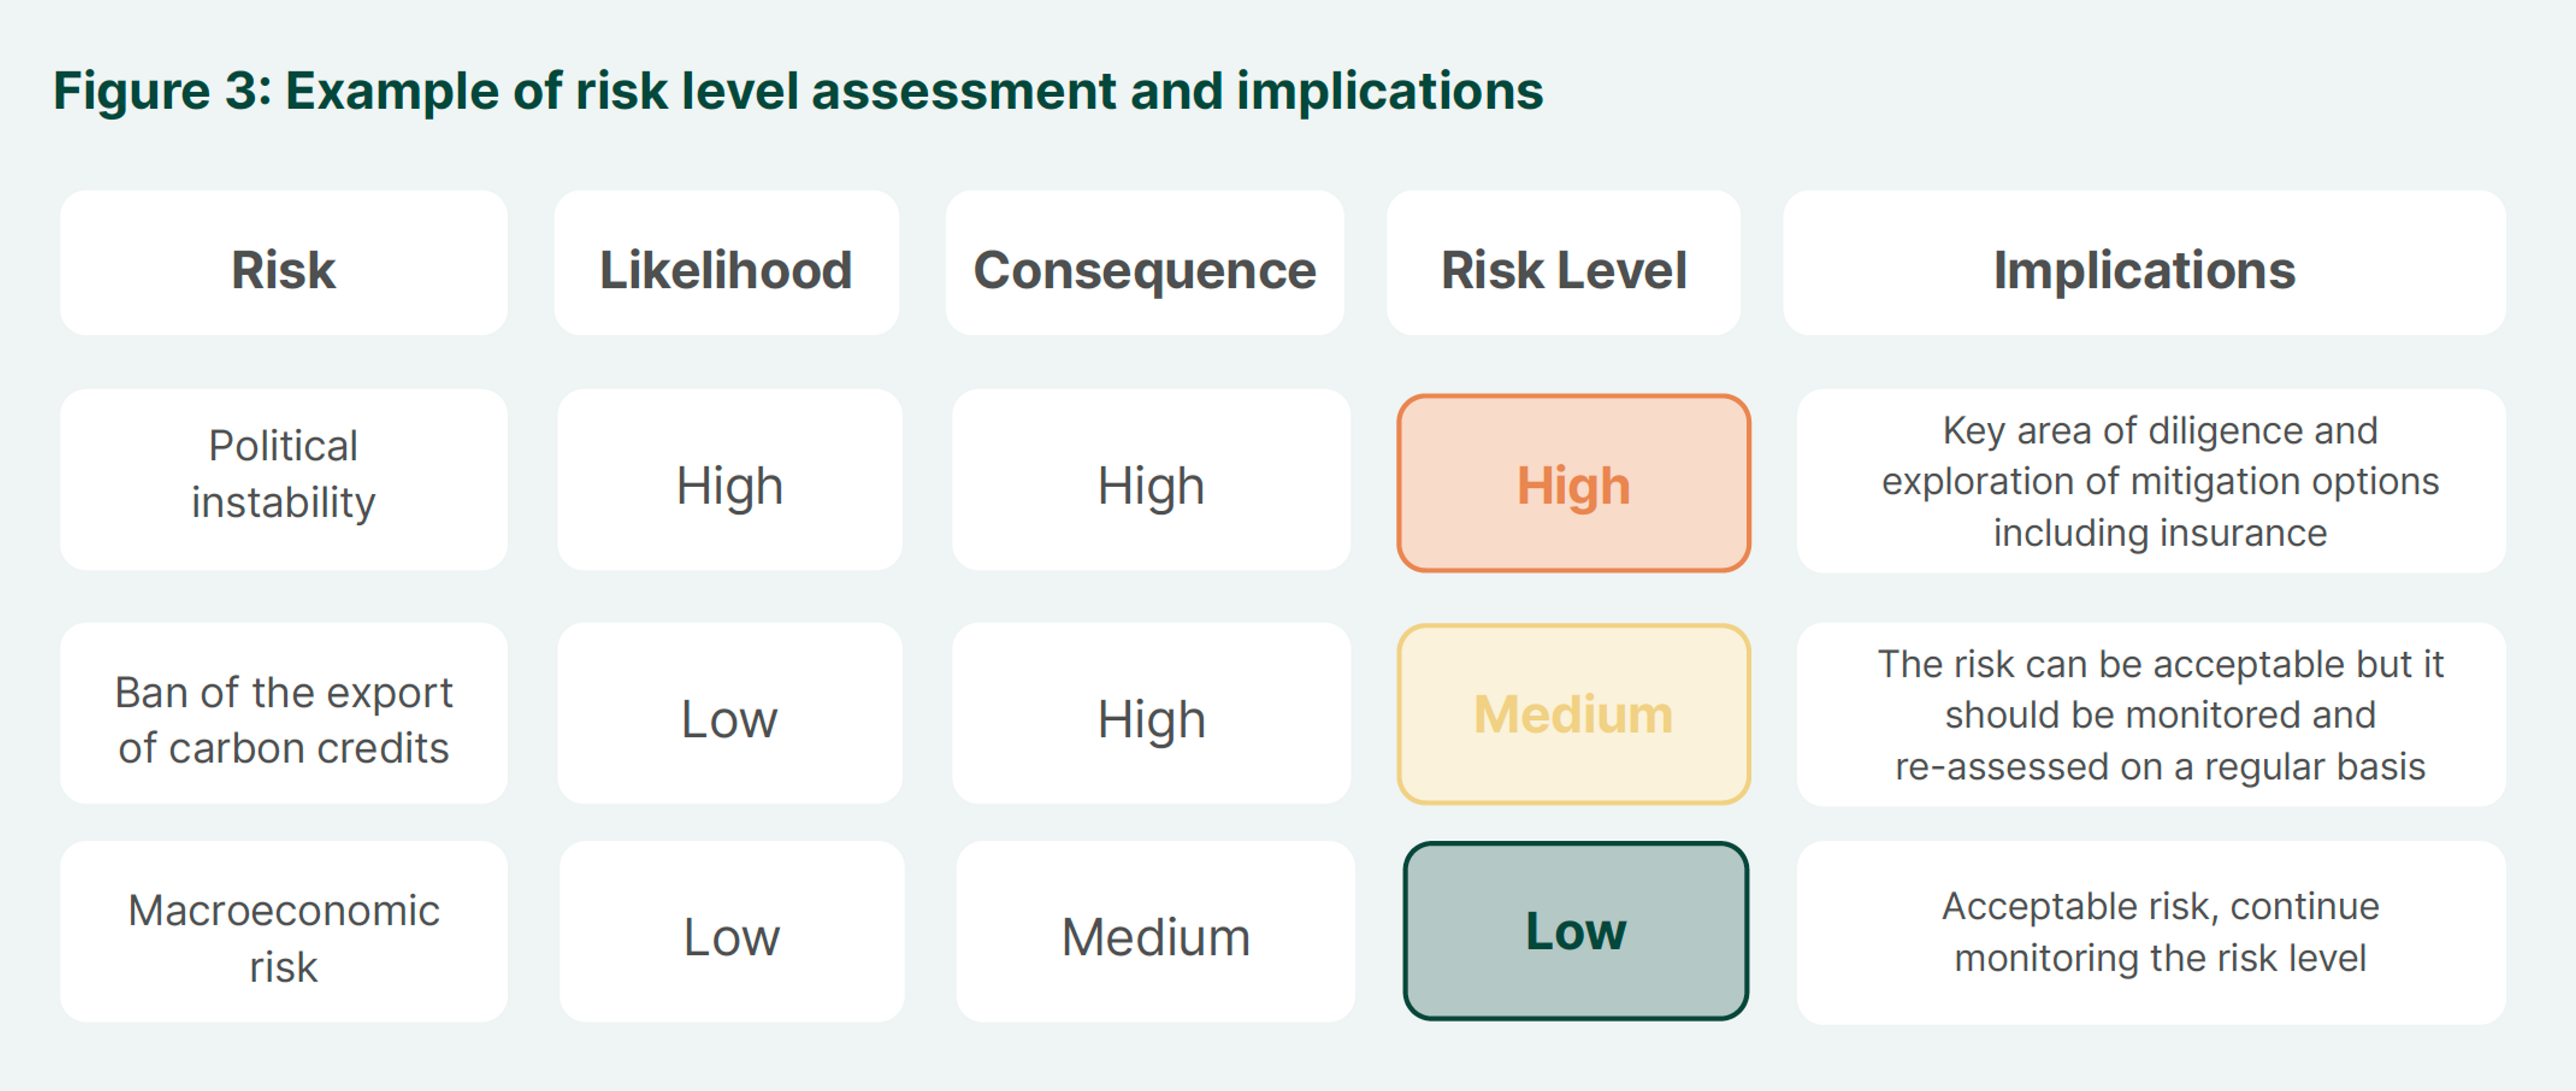  Table that shows risk, likelihood, consequence, risk level, and implications for the VCM